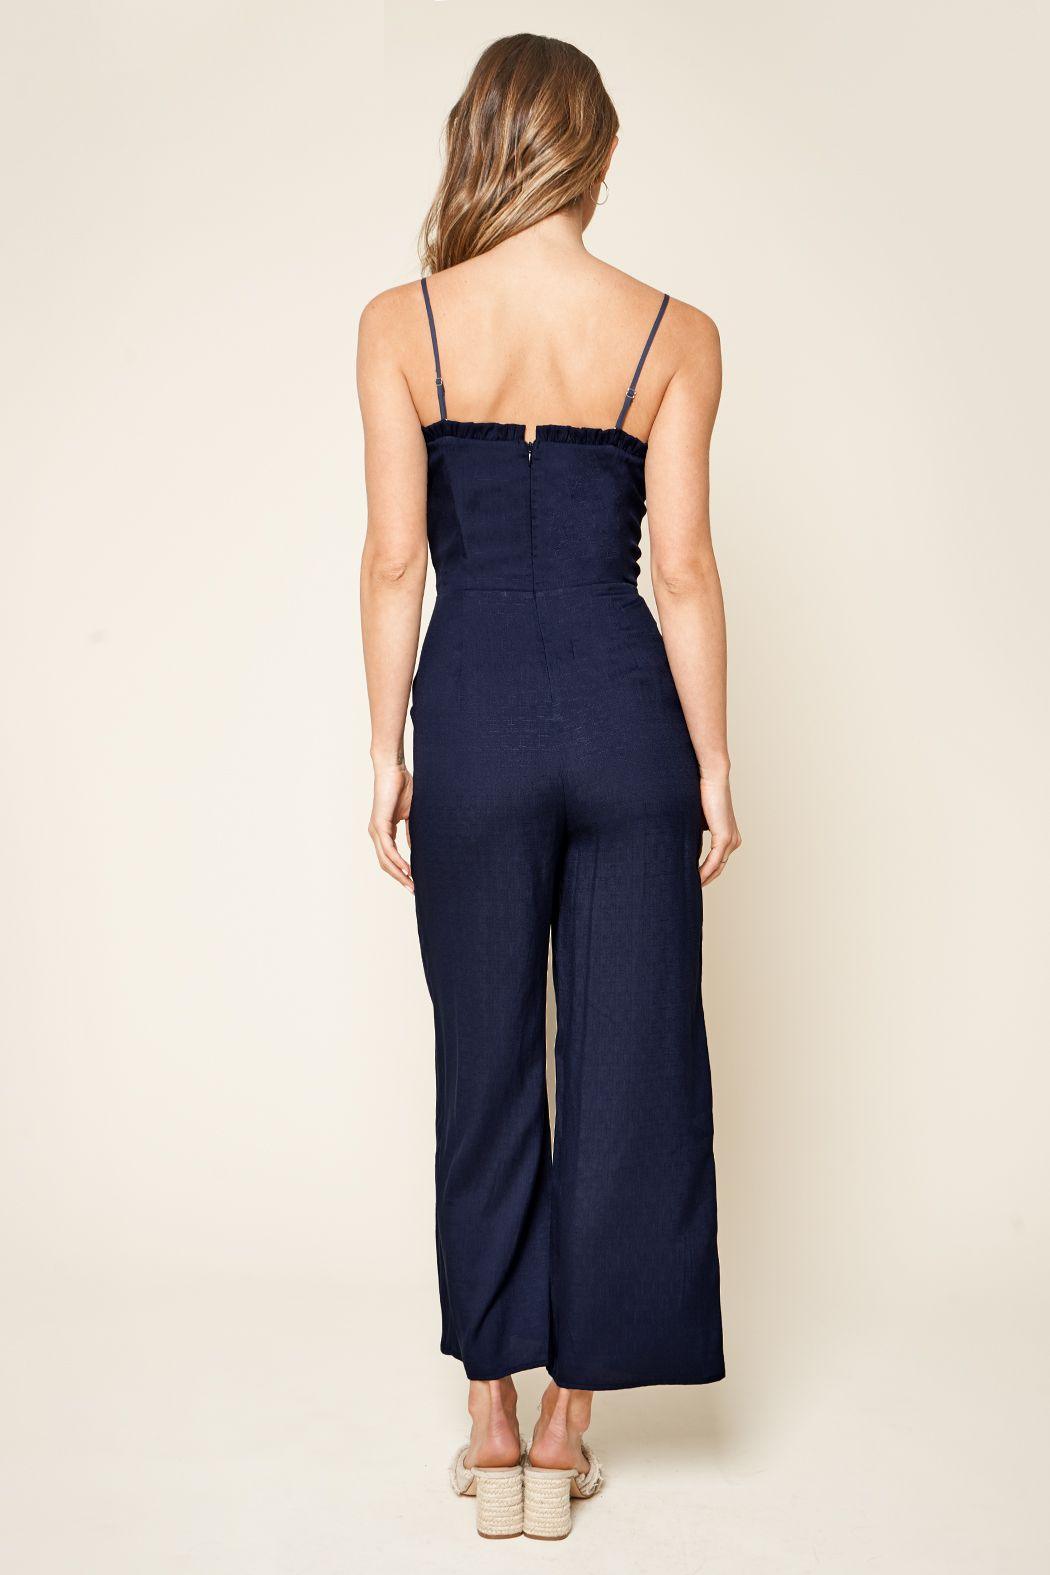 Lola Ruffled Wide Leg Navy Jumpsuit from The House of CO-KY - Jumpsuits & Rompers